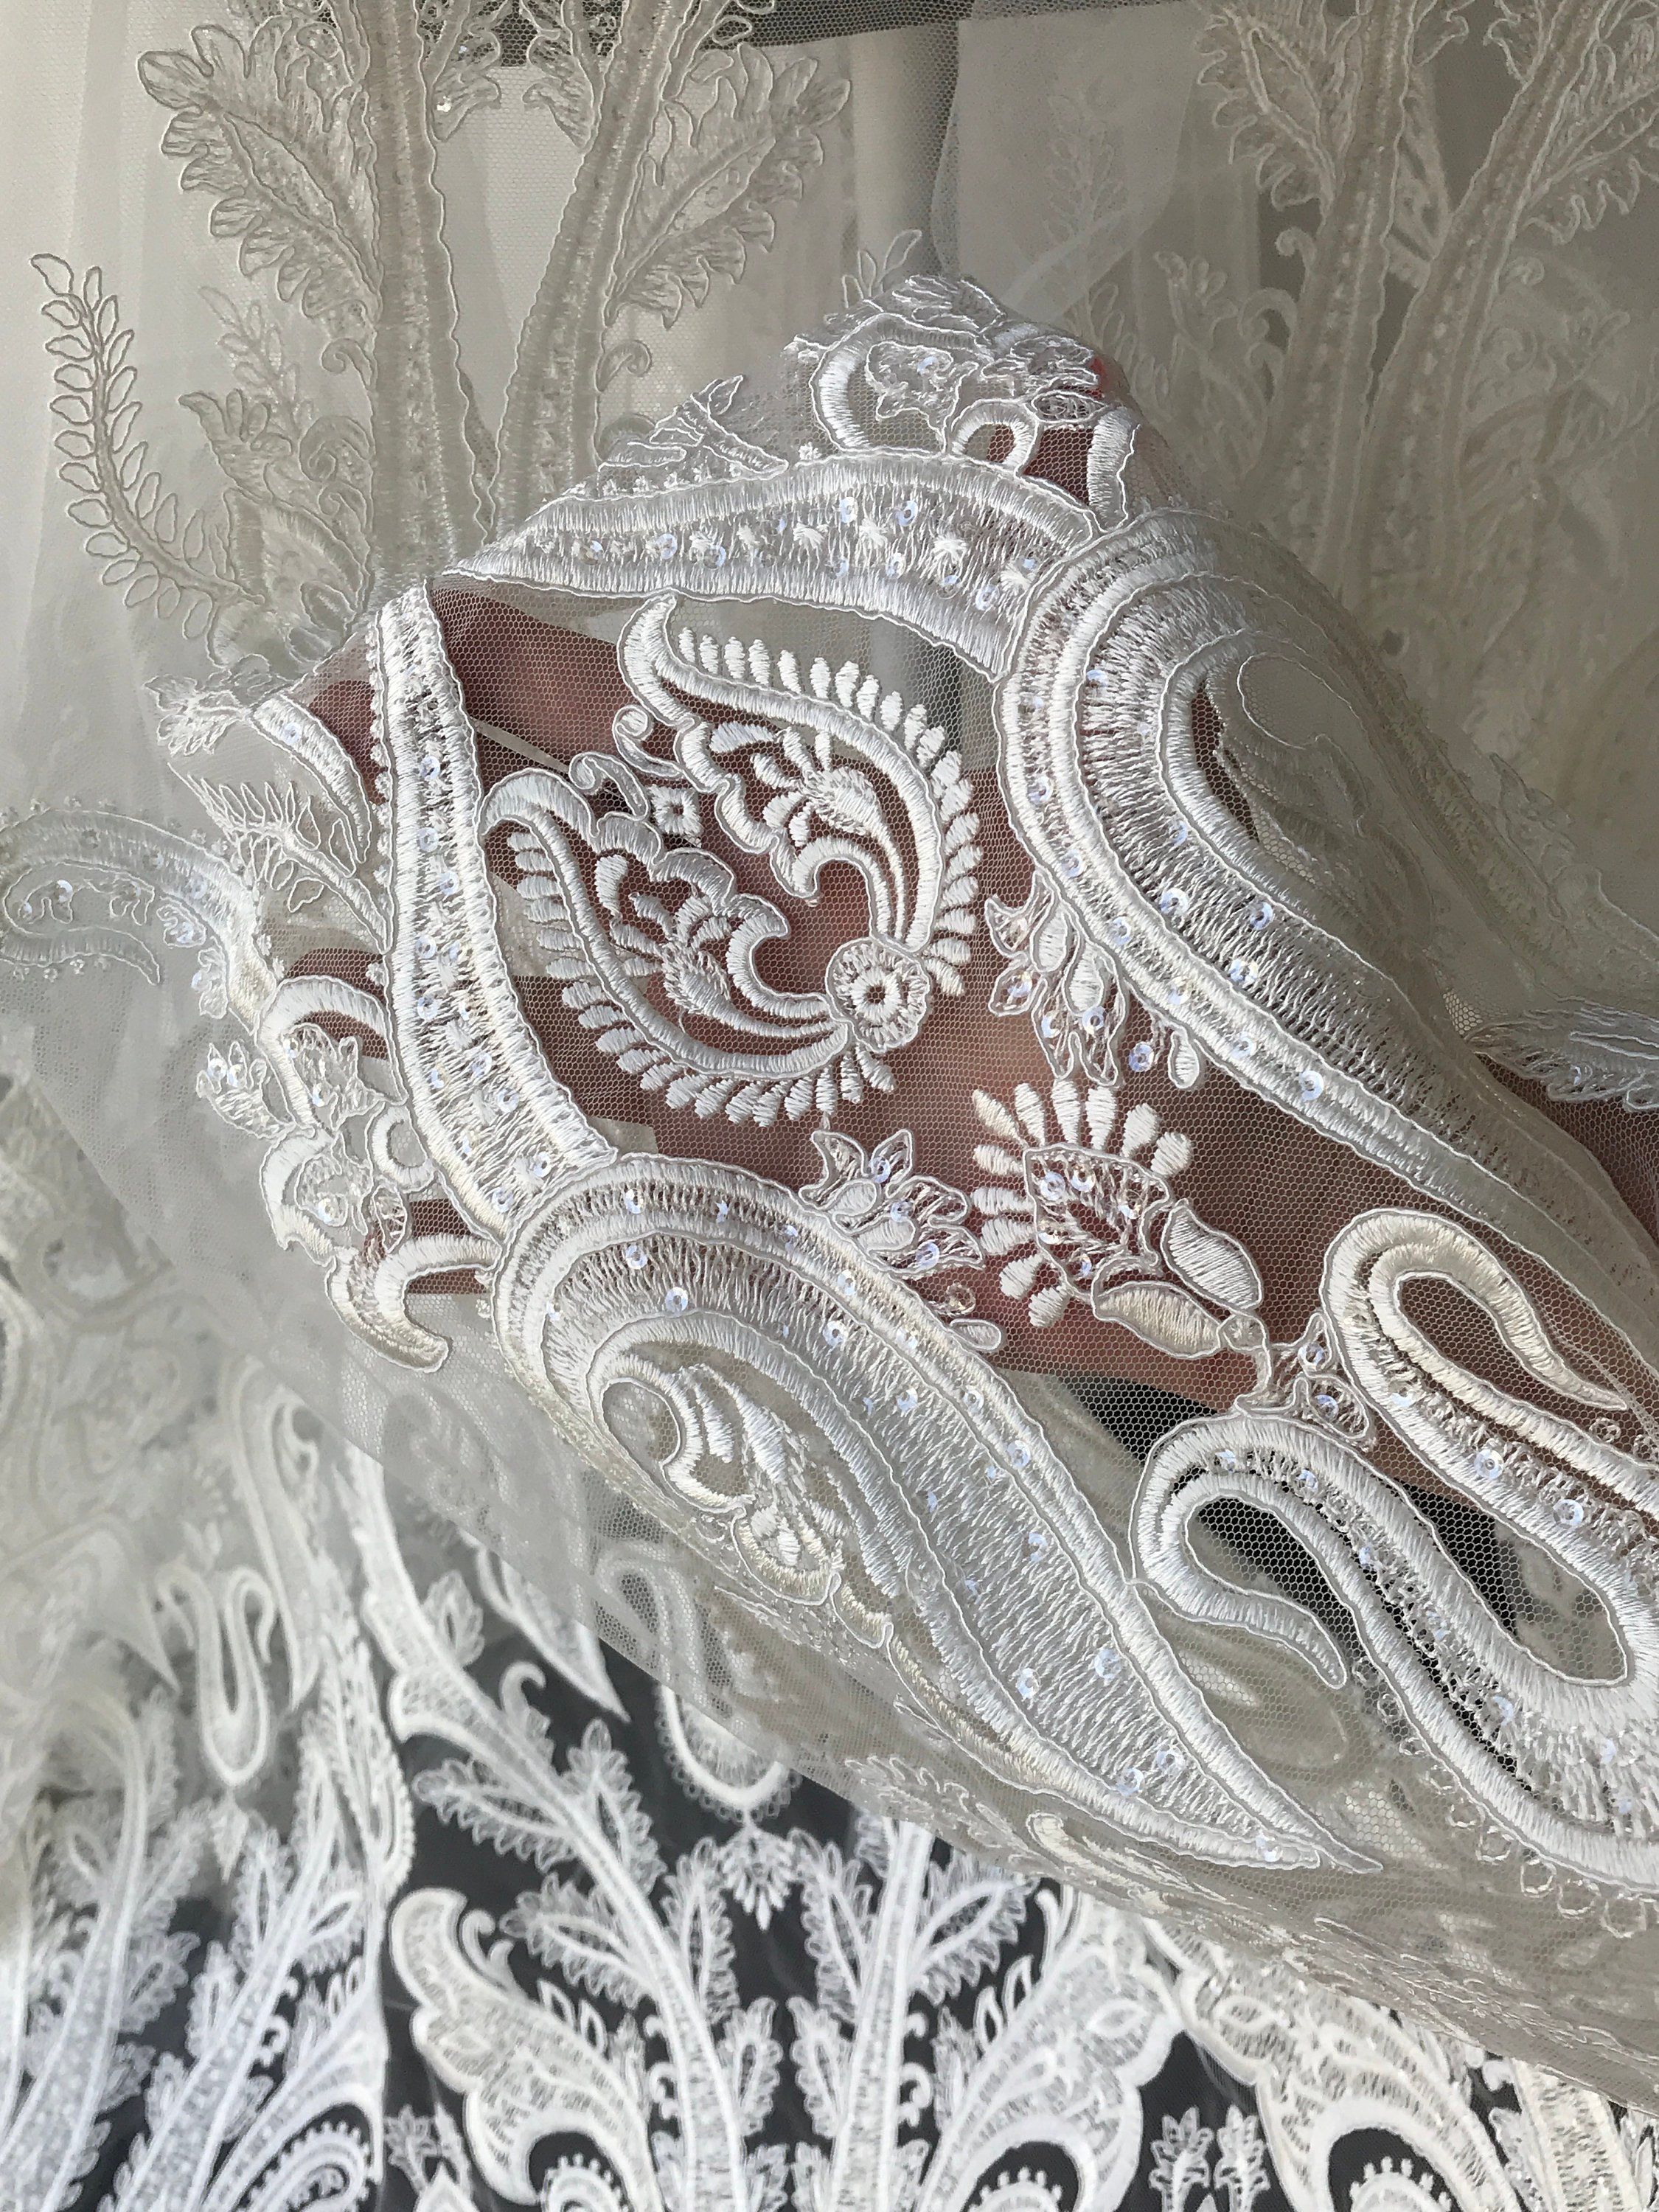 Off White Light Ivory corded bridal lace fabric with clear sequins embroidered Baroque design scallop edge wedding dress lace fabric